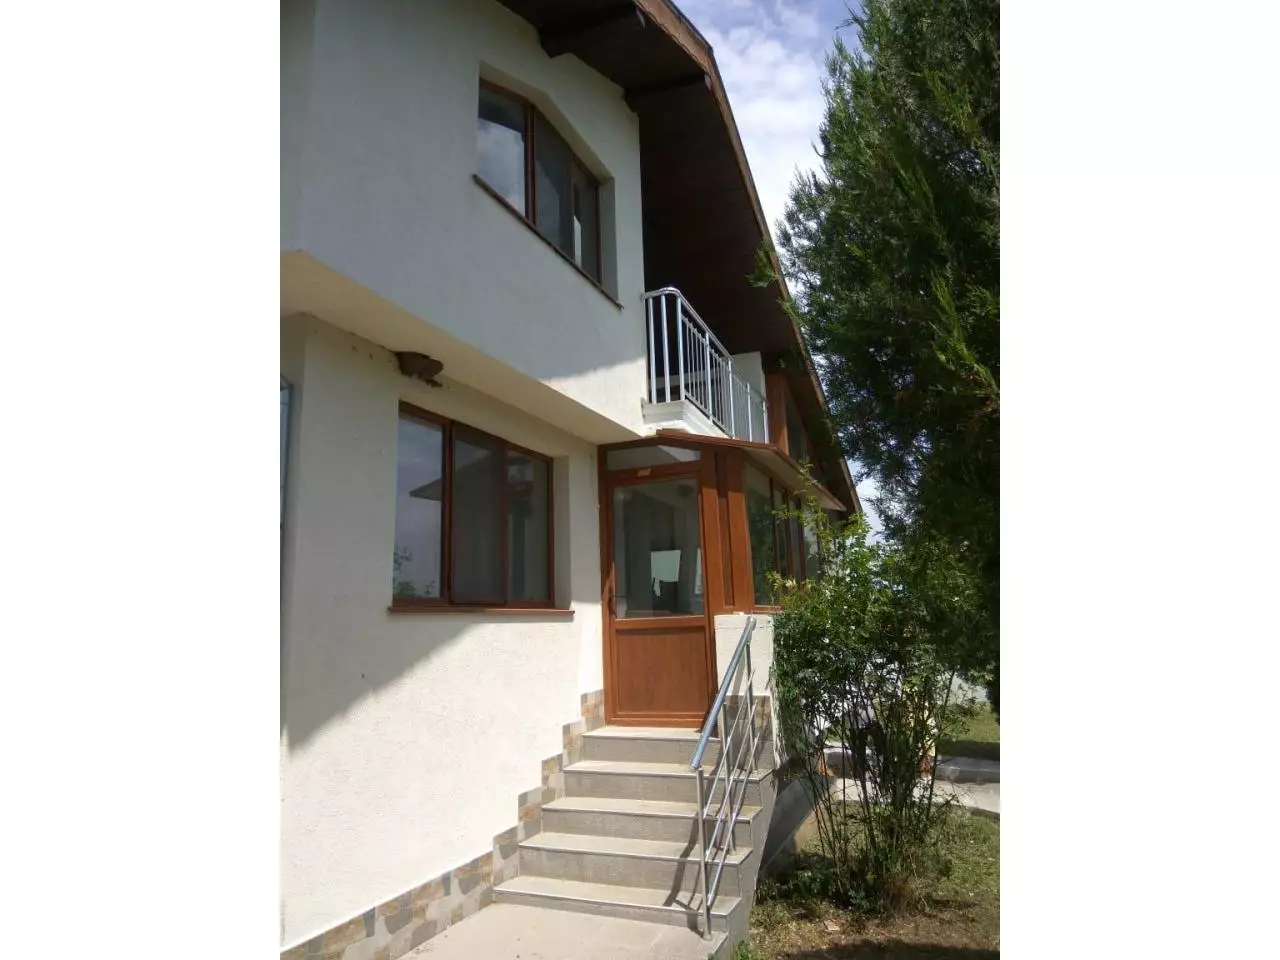 For sale a new house with an area of 370 sq.m. in the Bulgarian - 3/12